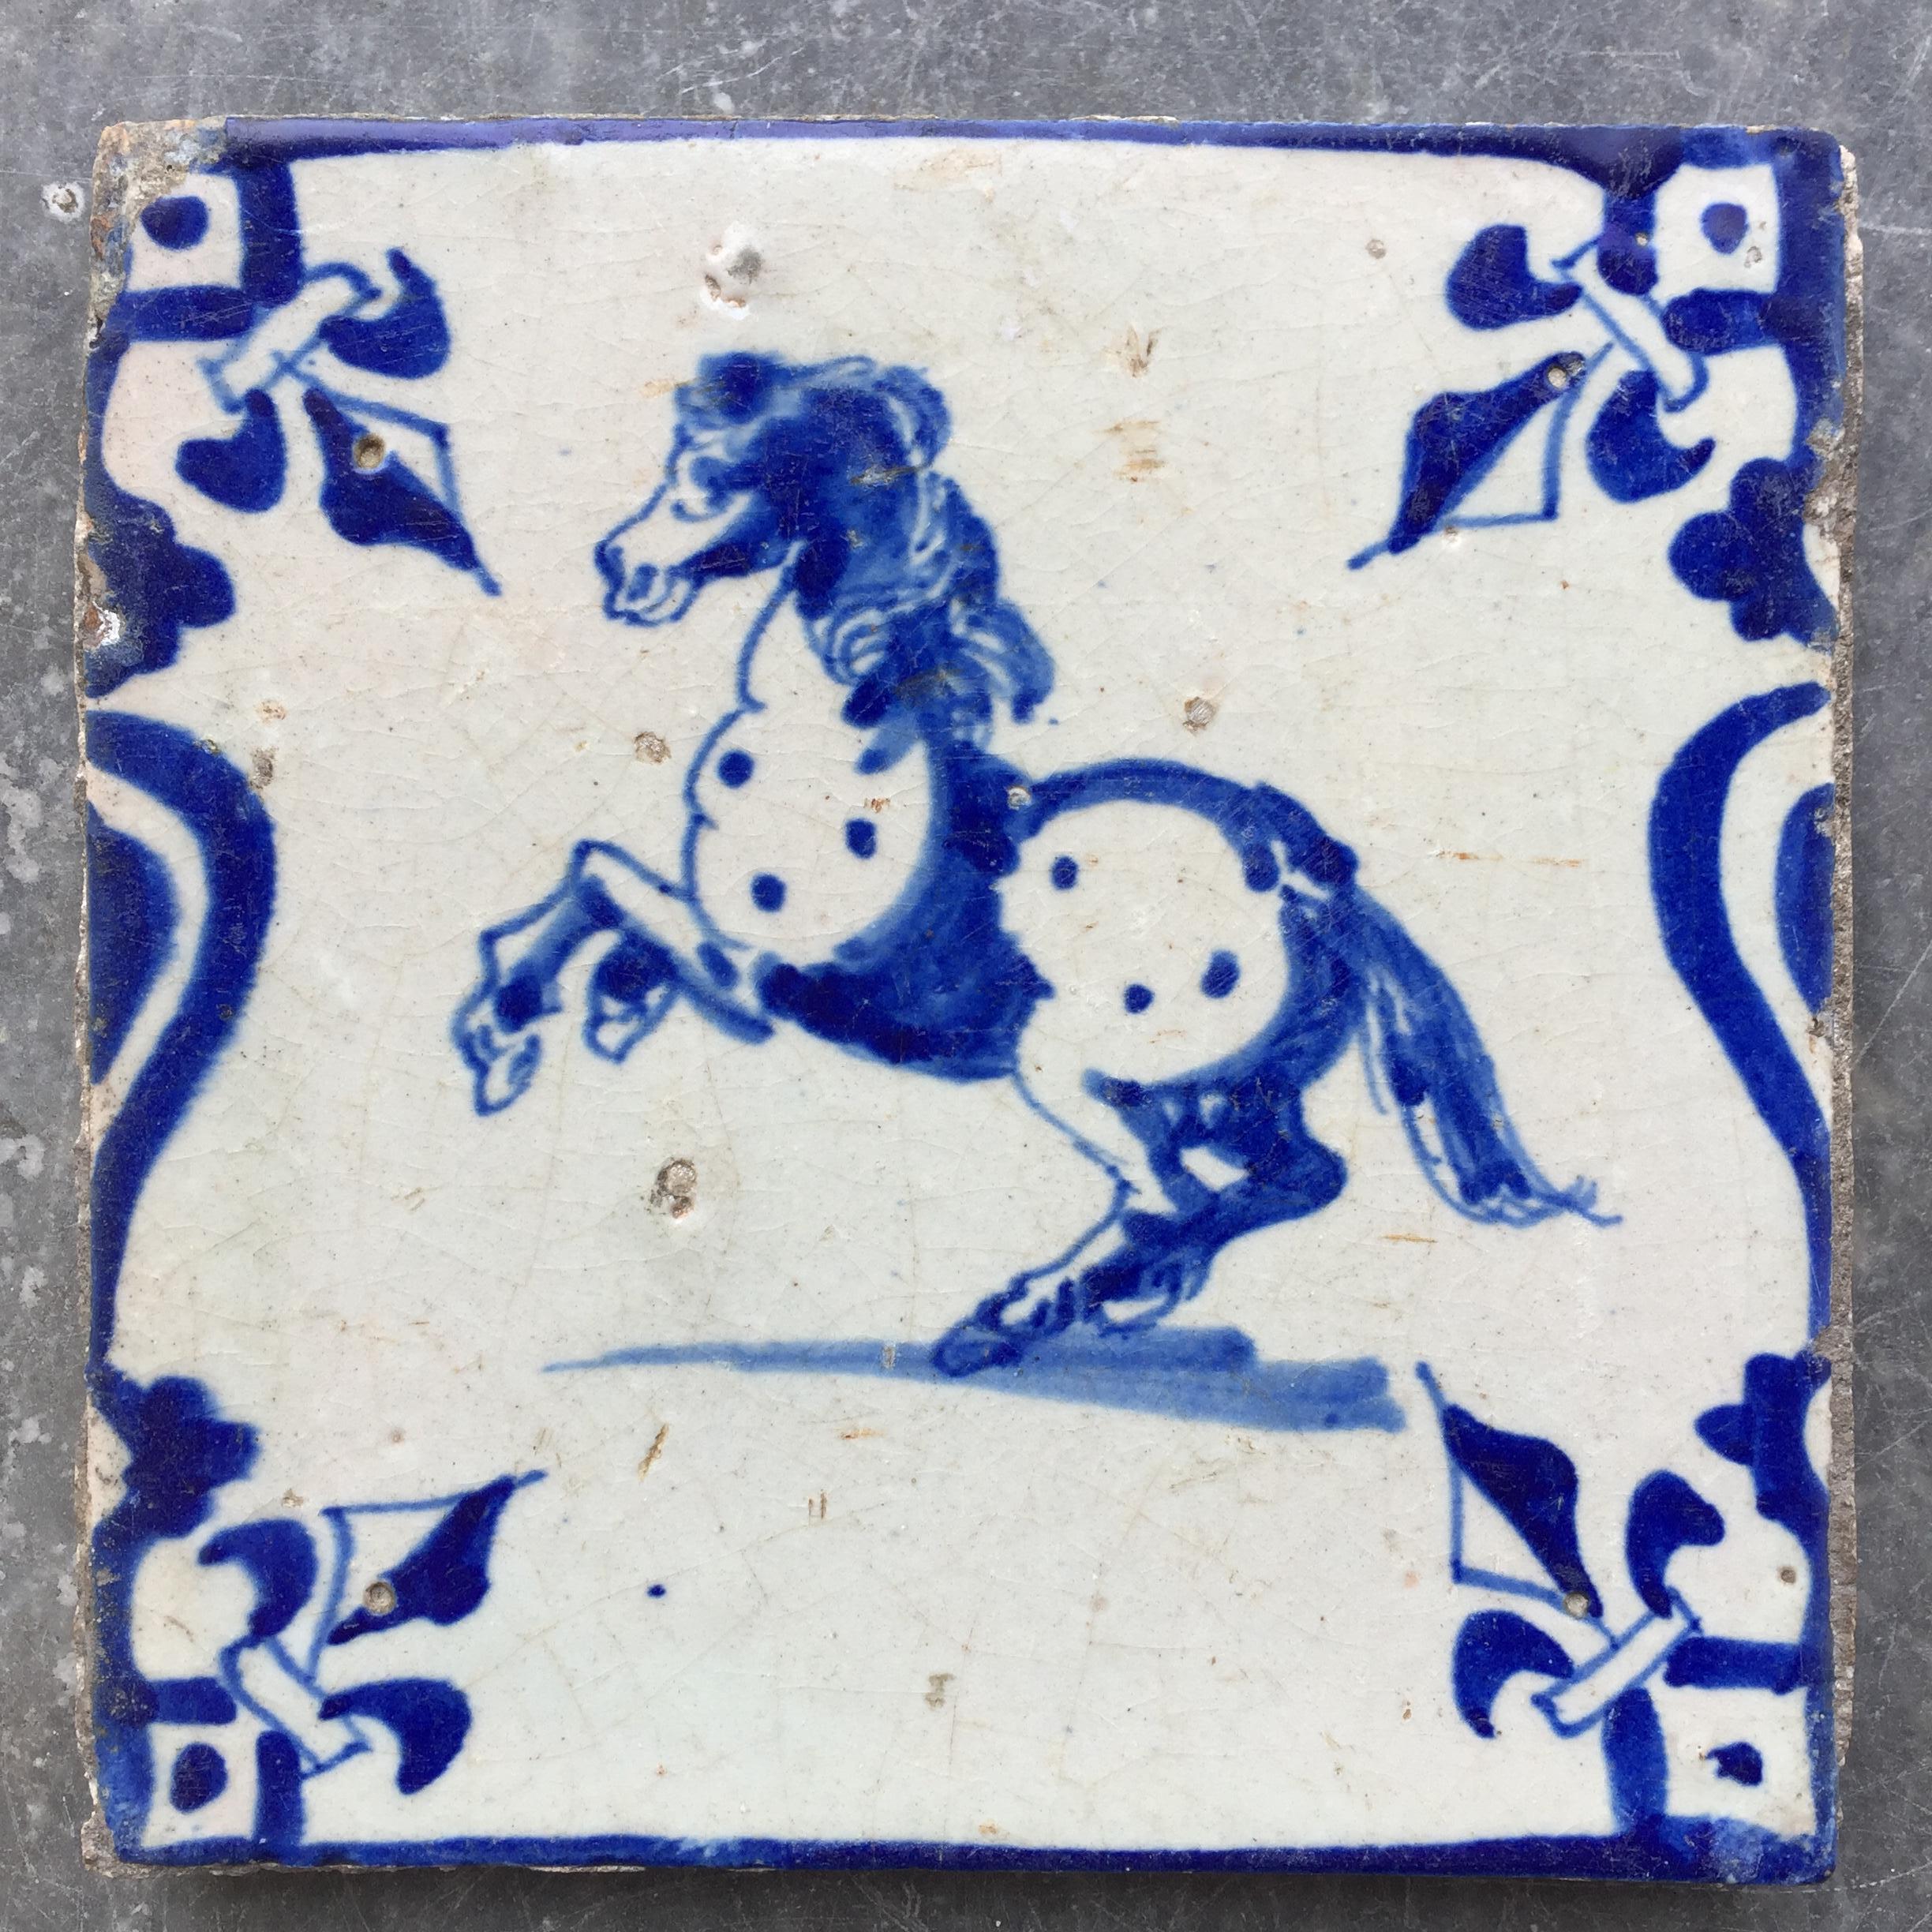 Nederland
Circa 1630 - 1660

A fine blue and white Dutch Delft tile with a decoration of a rearing grey horse.
Painted within a candelabra border.

A genuine collectible of approximately 400 years old.